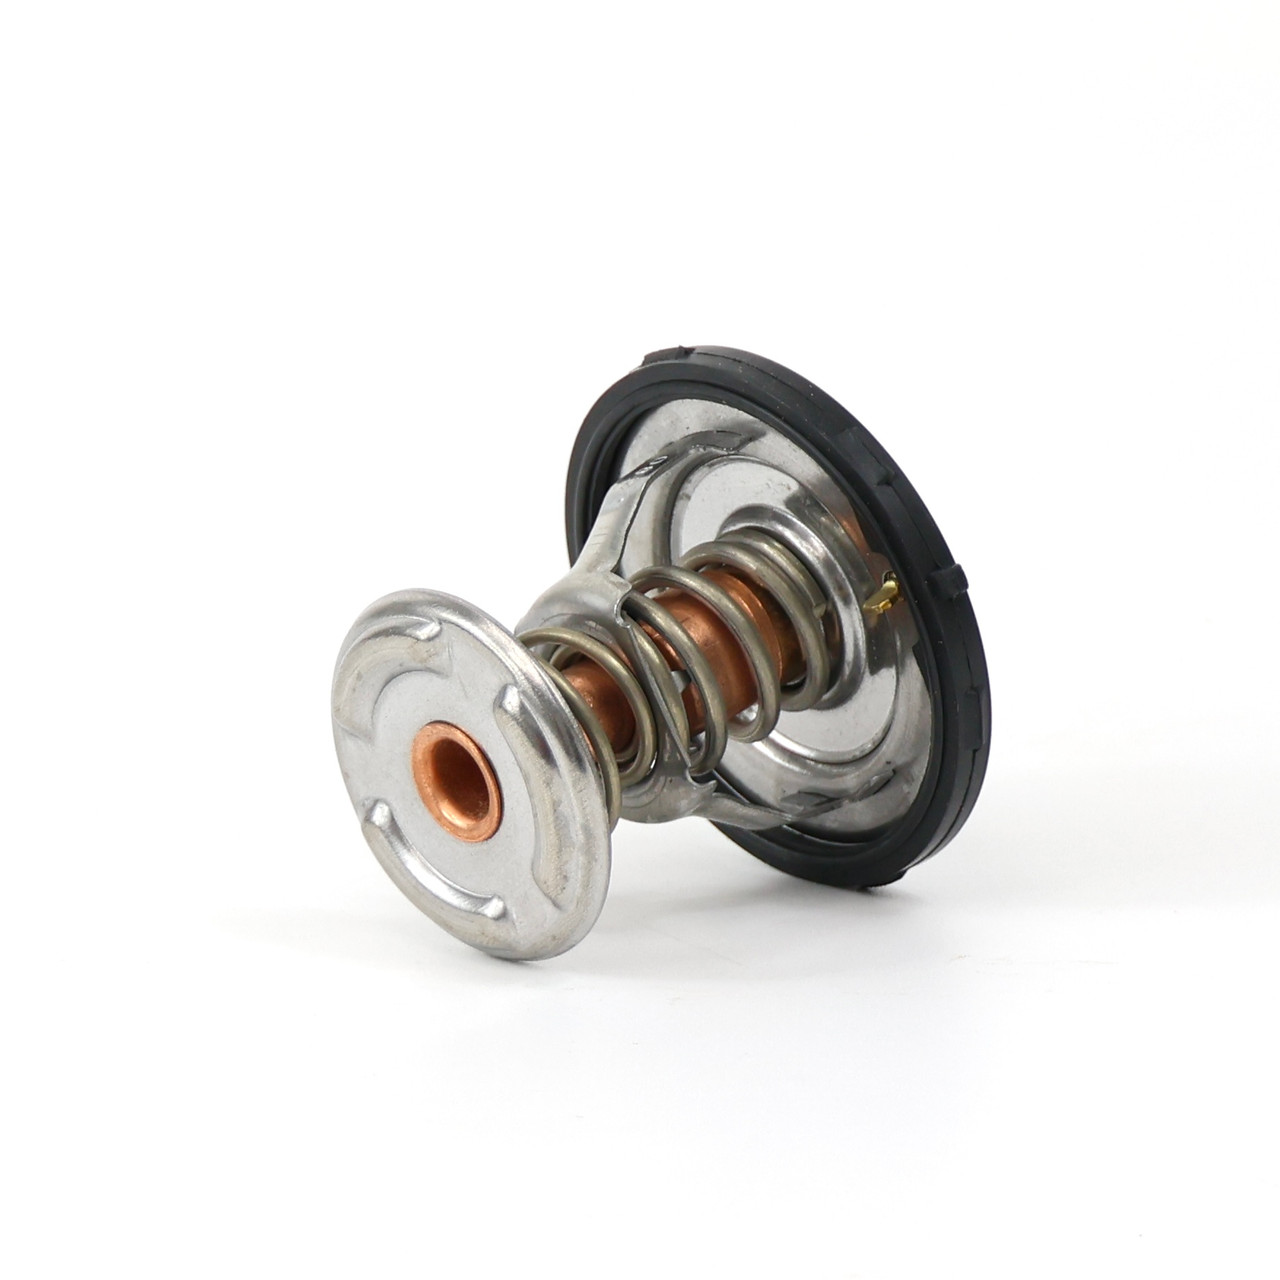 187 Degree LS3 Thermostat for 2007-later LS-Based Car & Truck Engines 4.8 5.3 6.0 6.2 7.0 187* 